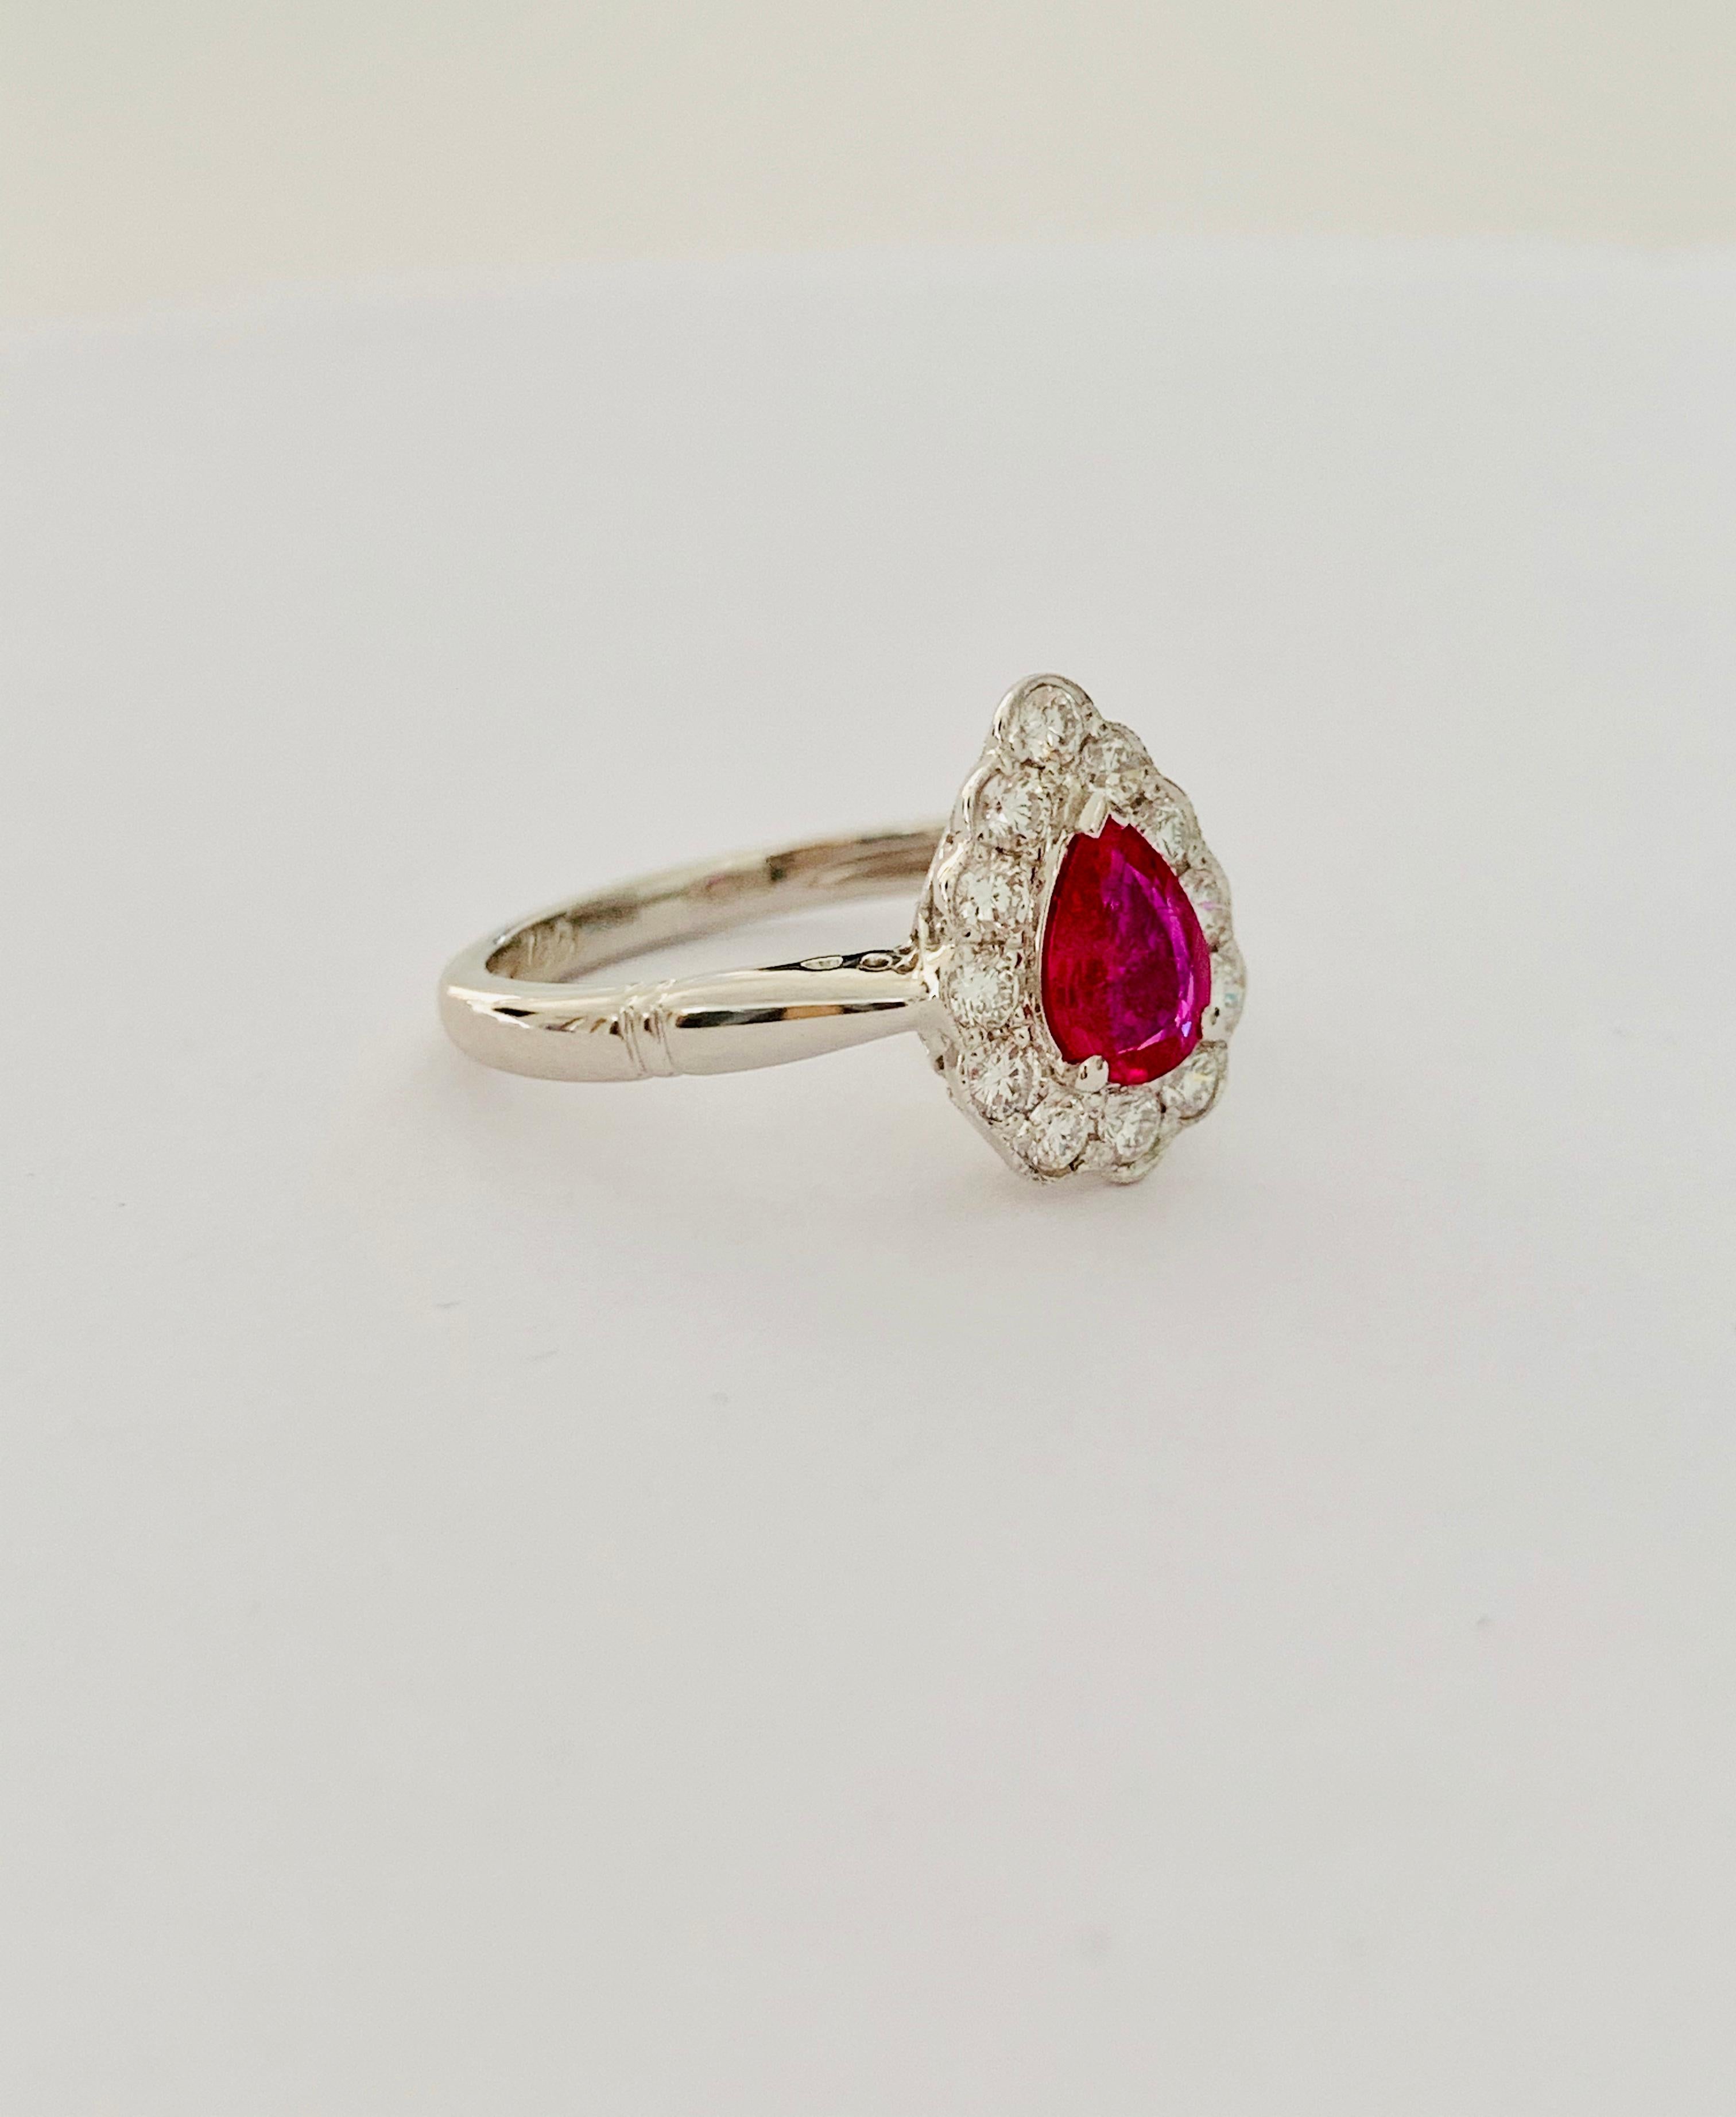 .71 Carat Pear Cut Ruby Set in 0.36 Carat Diamond Surround of 18 Carat Gold For Sale 4